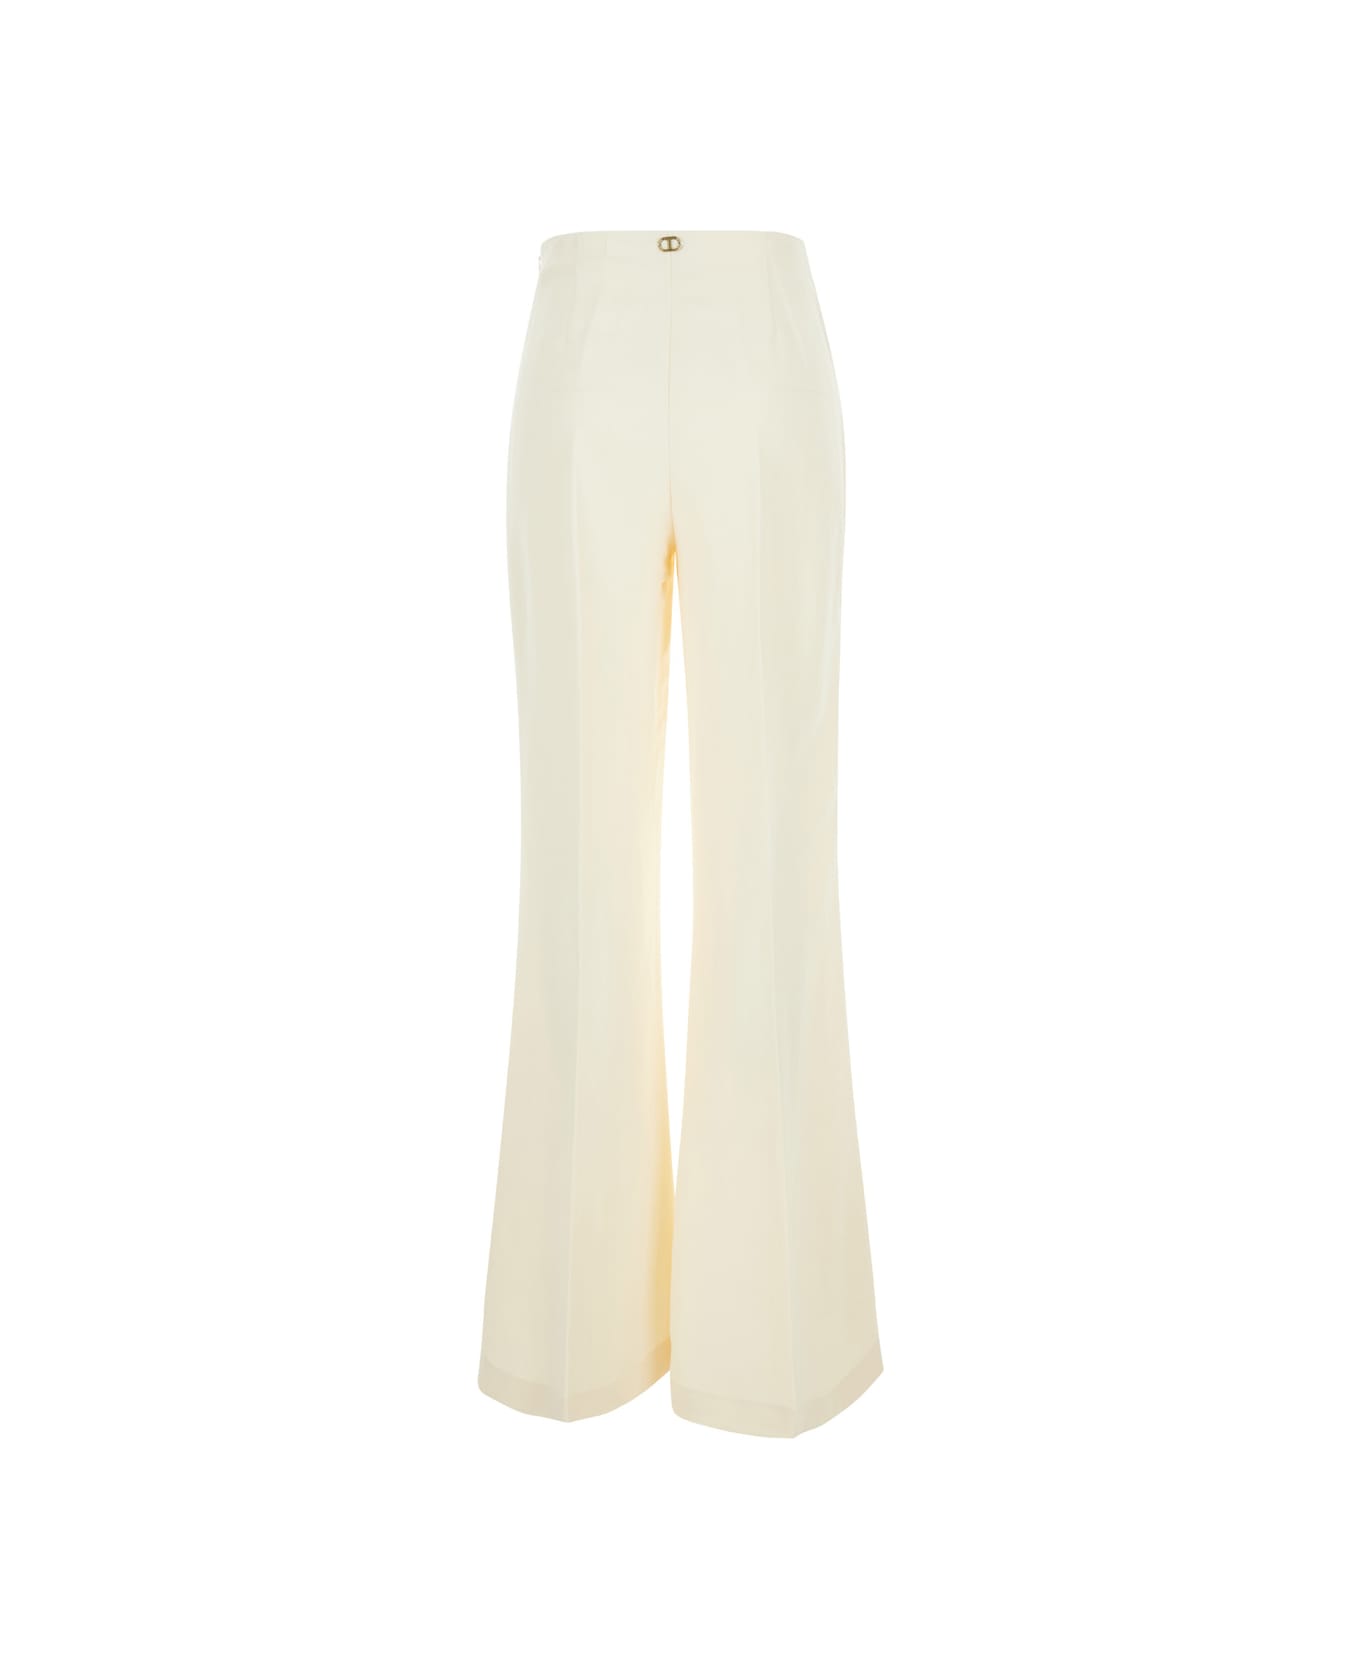 TwinSet White Flared Pants In Linen Blend Woman - White